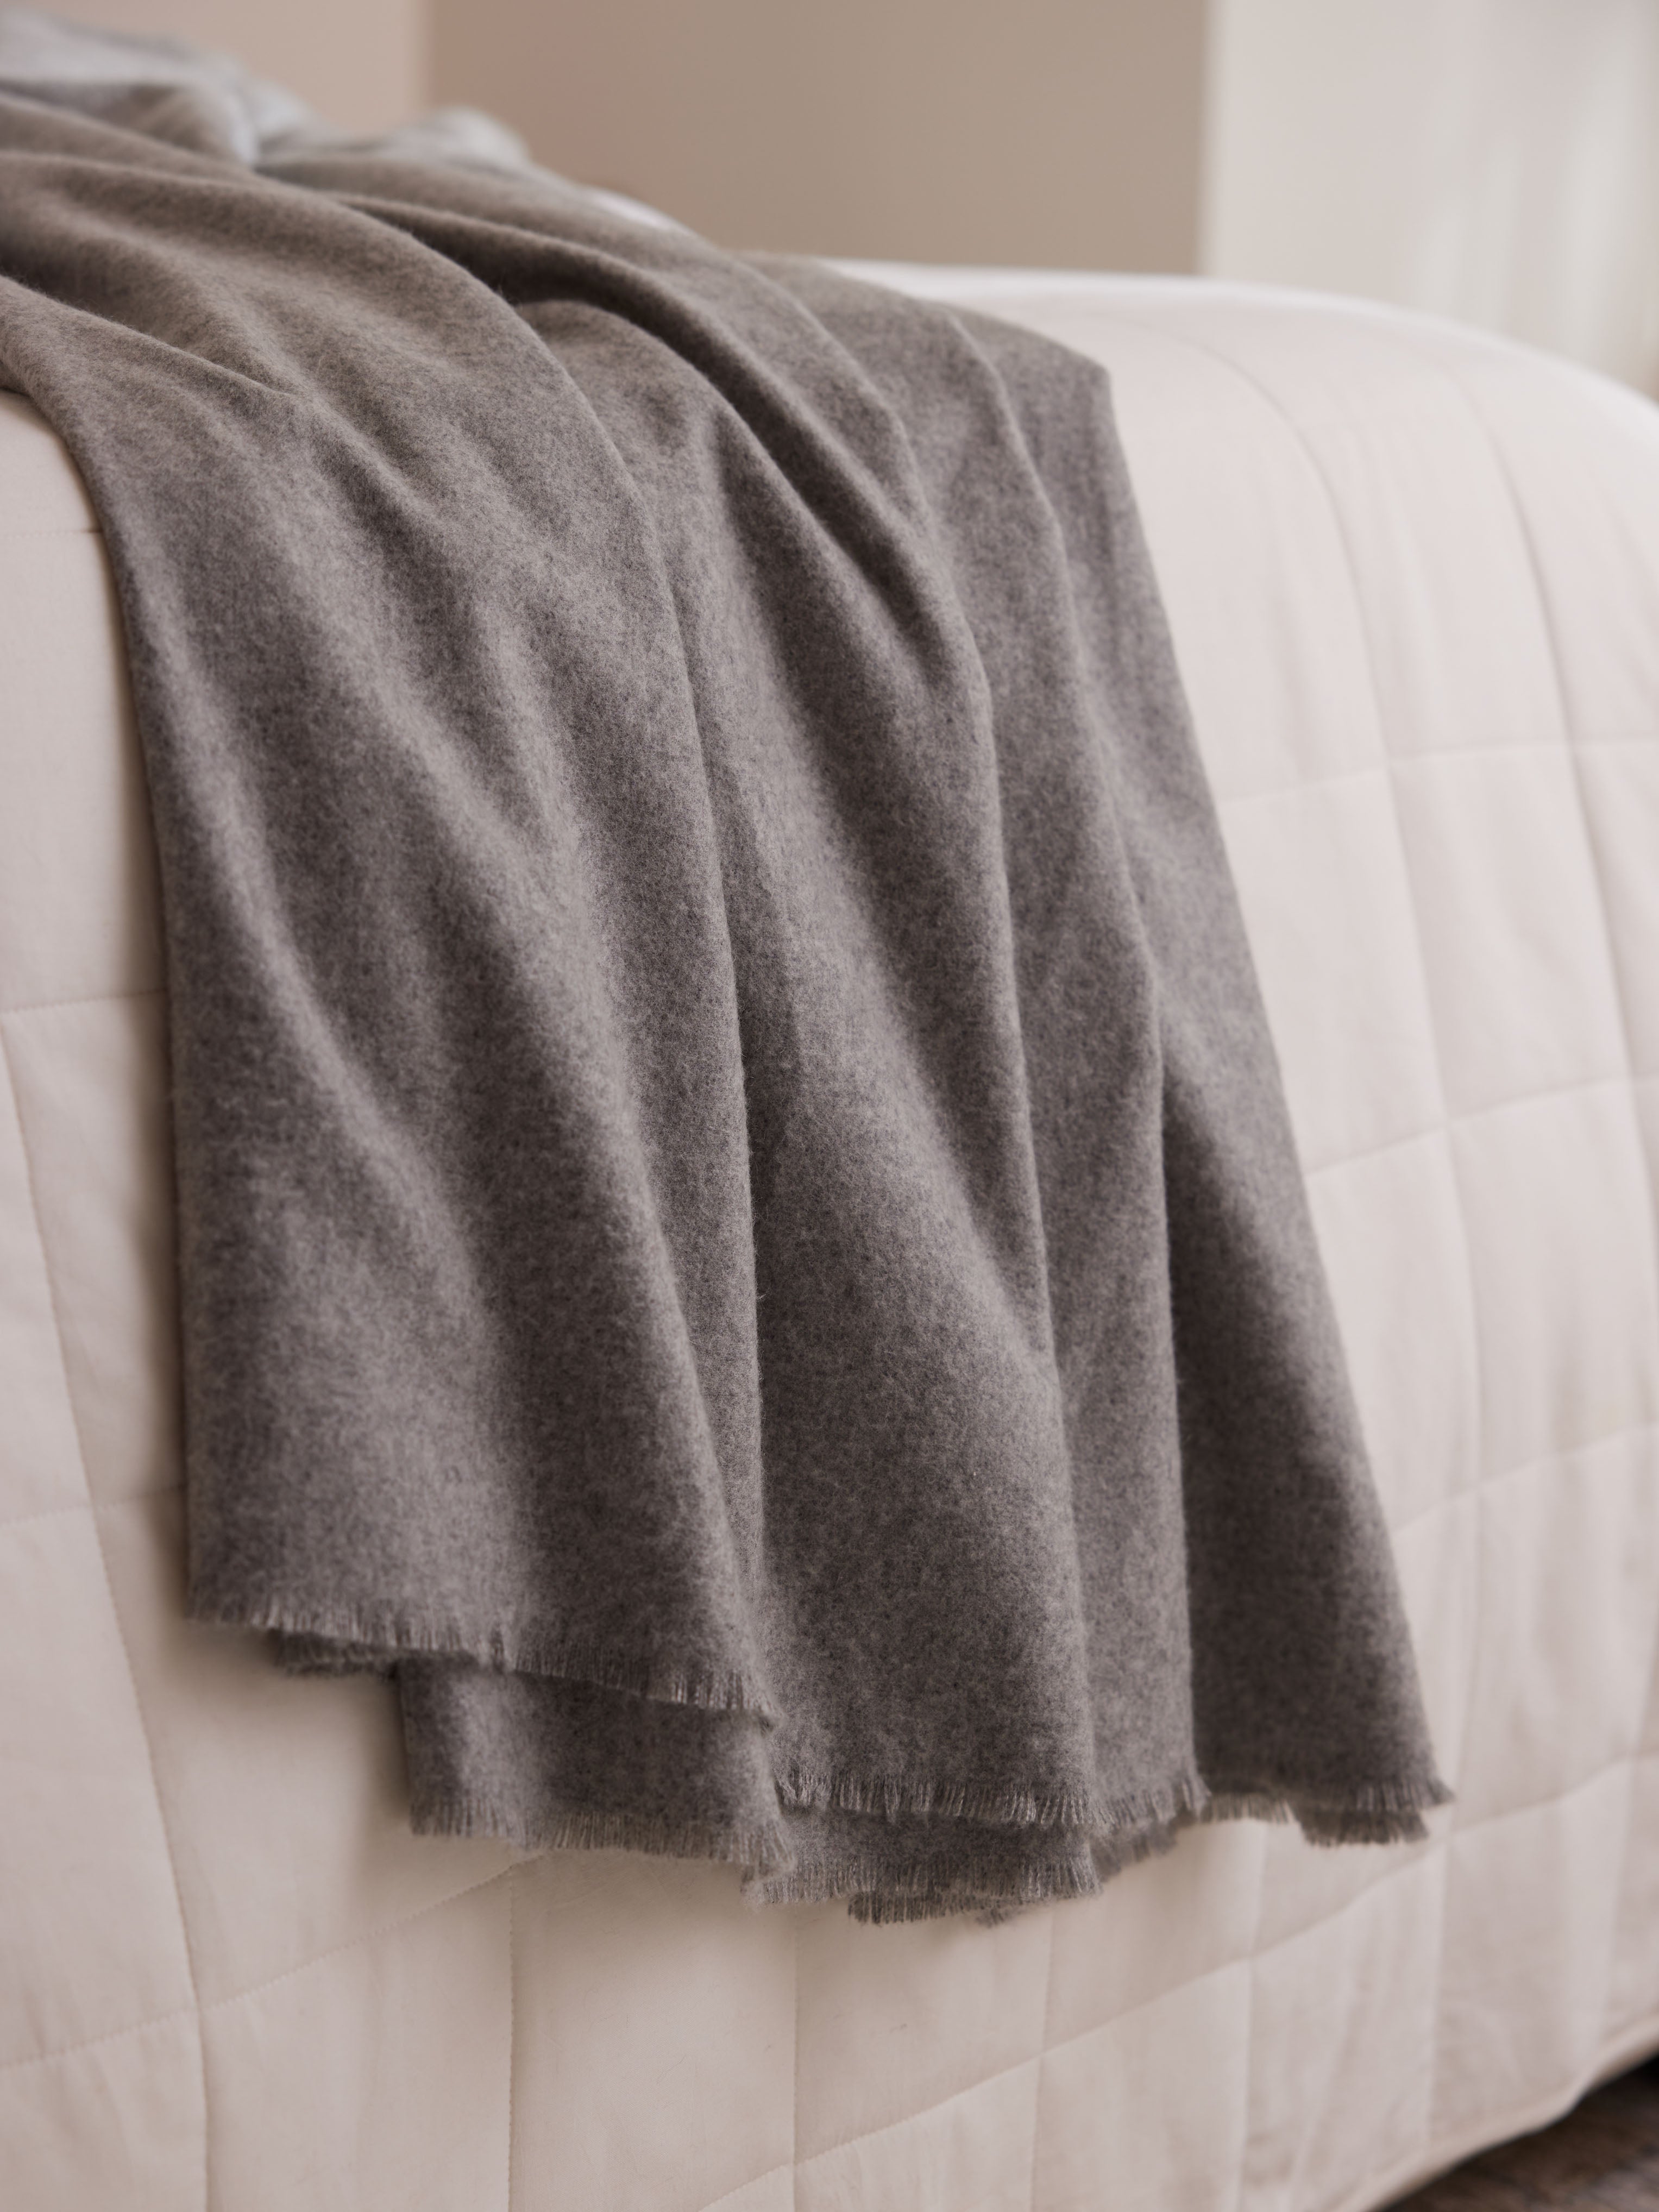 Close up of cashmere blanket on bed |Color:Pebble